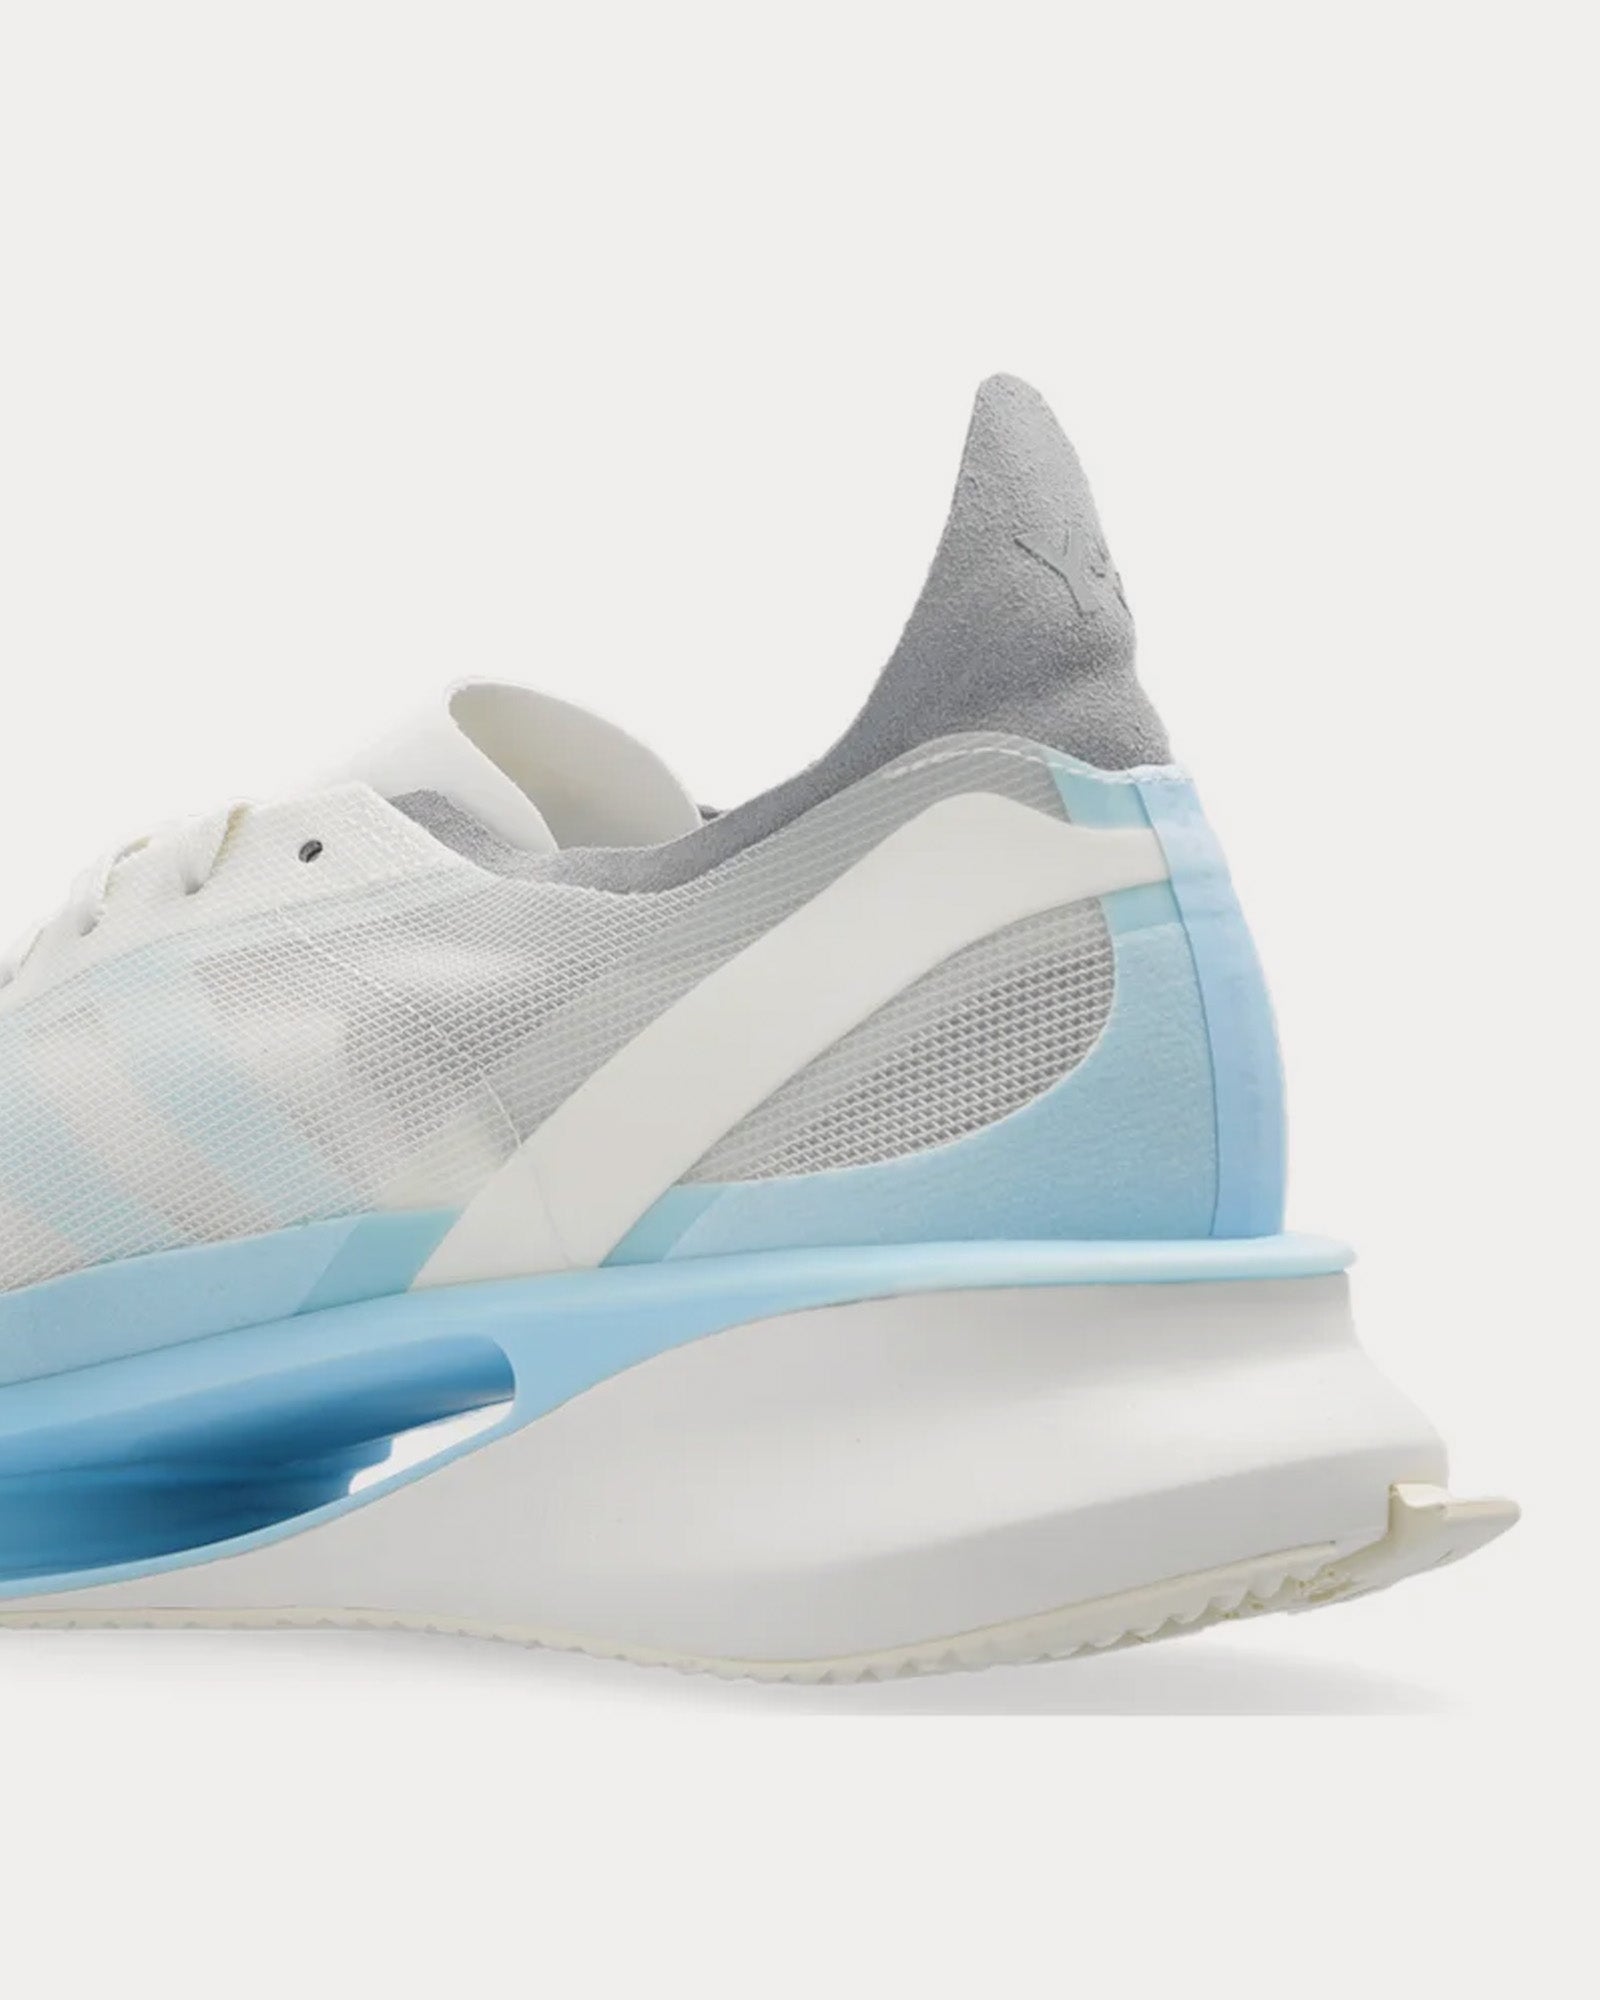 Y-3 - S-Gendo Run Off White / Grey / Light Blue Running Shoes